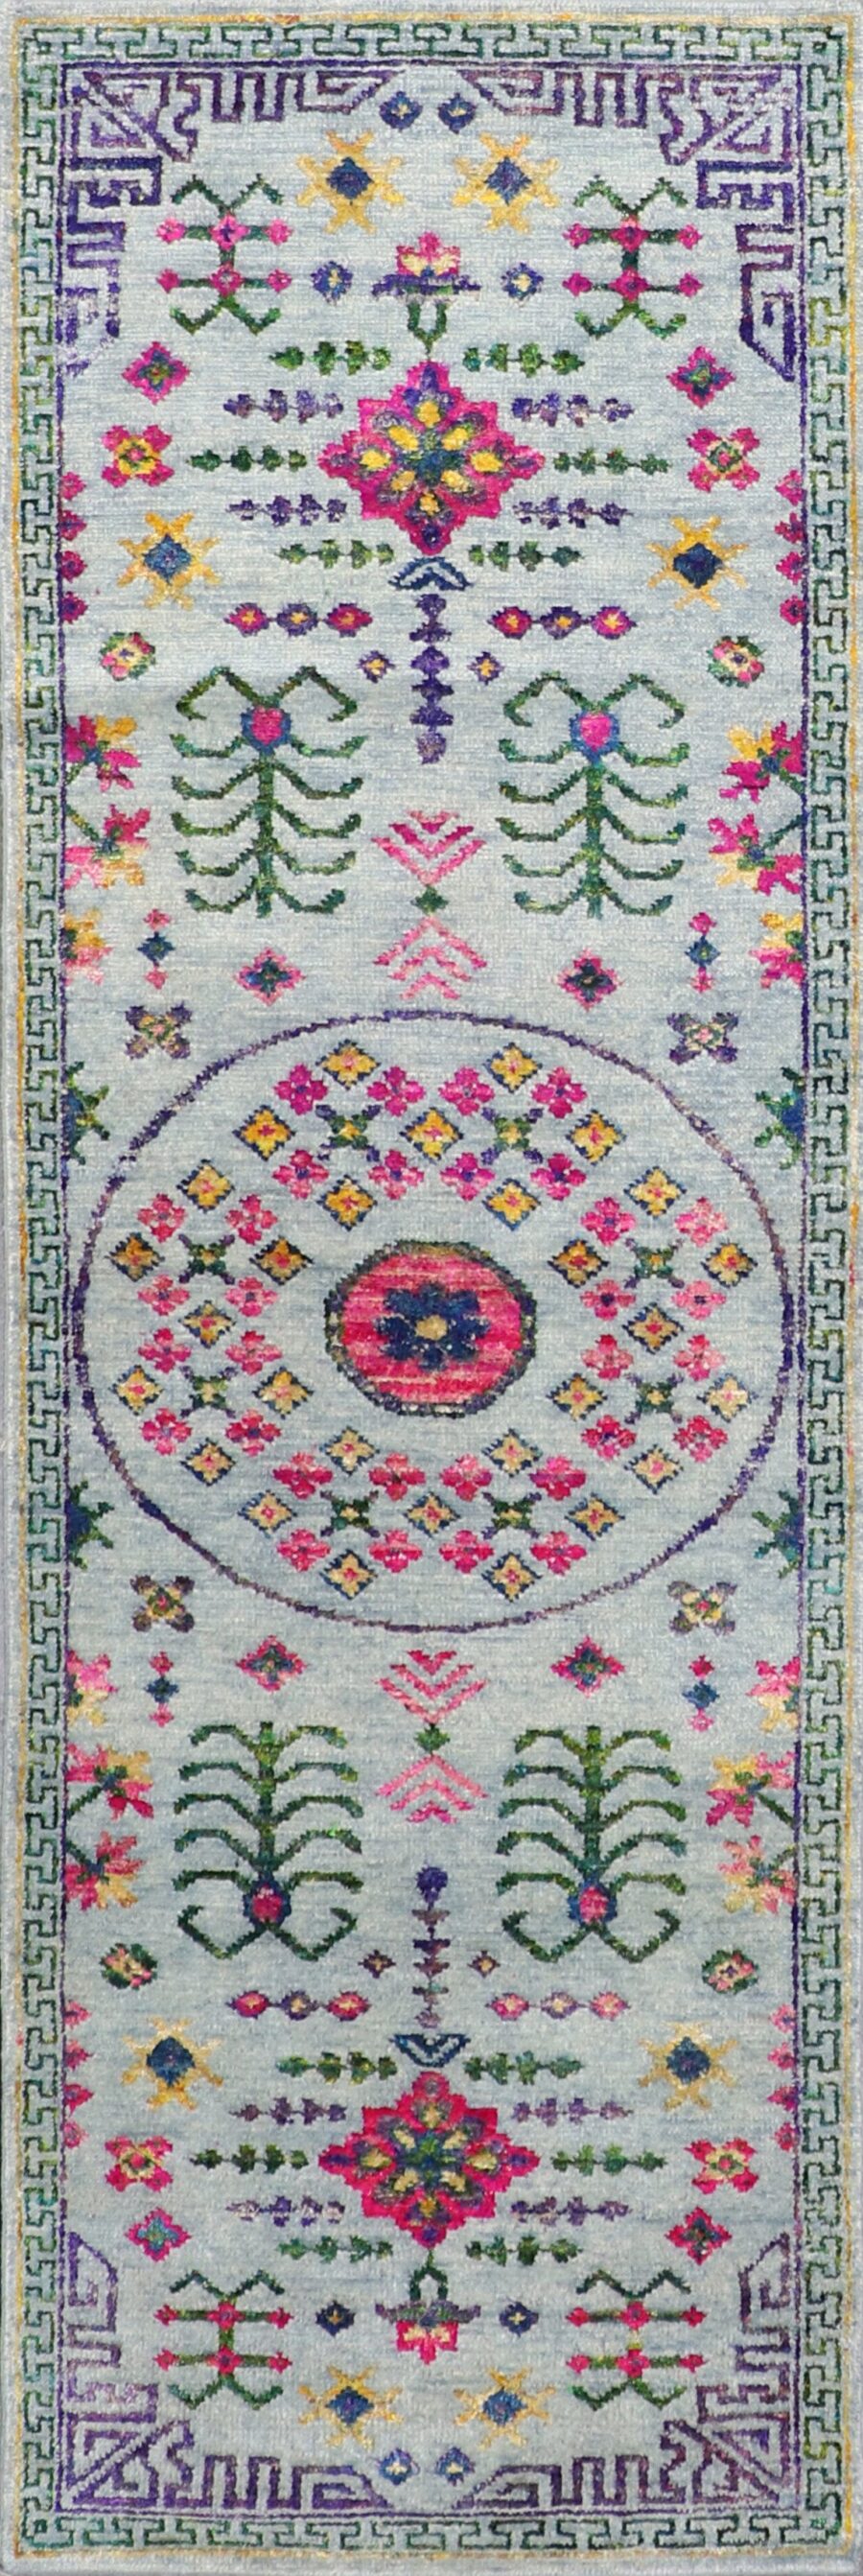 3’x9’9” Decorative Gay,Green & Pink Wool & Silk Hand-Knotted Rug - Direct Rug Import | Rugs in Chicago, Indiana,South Bend,Granger